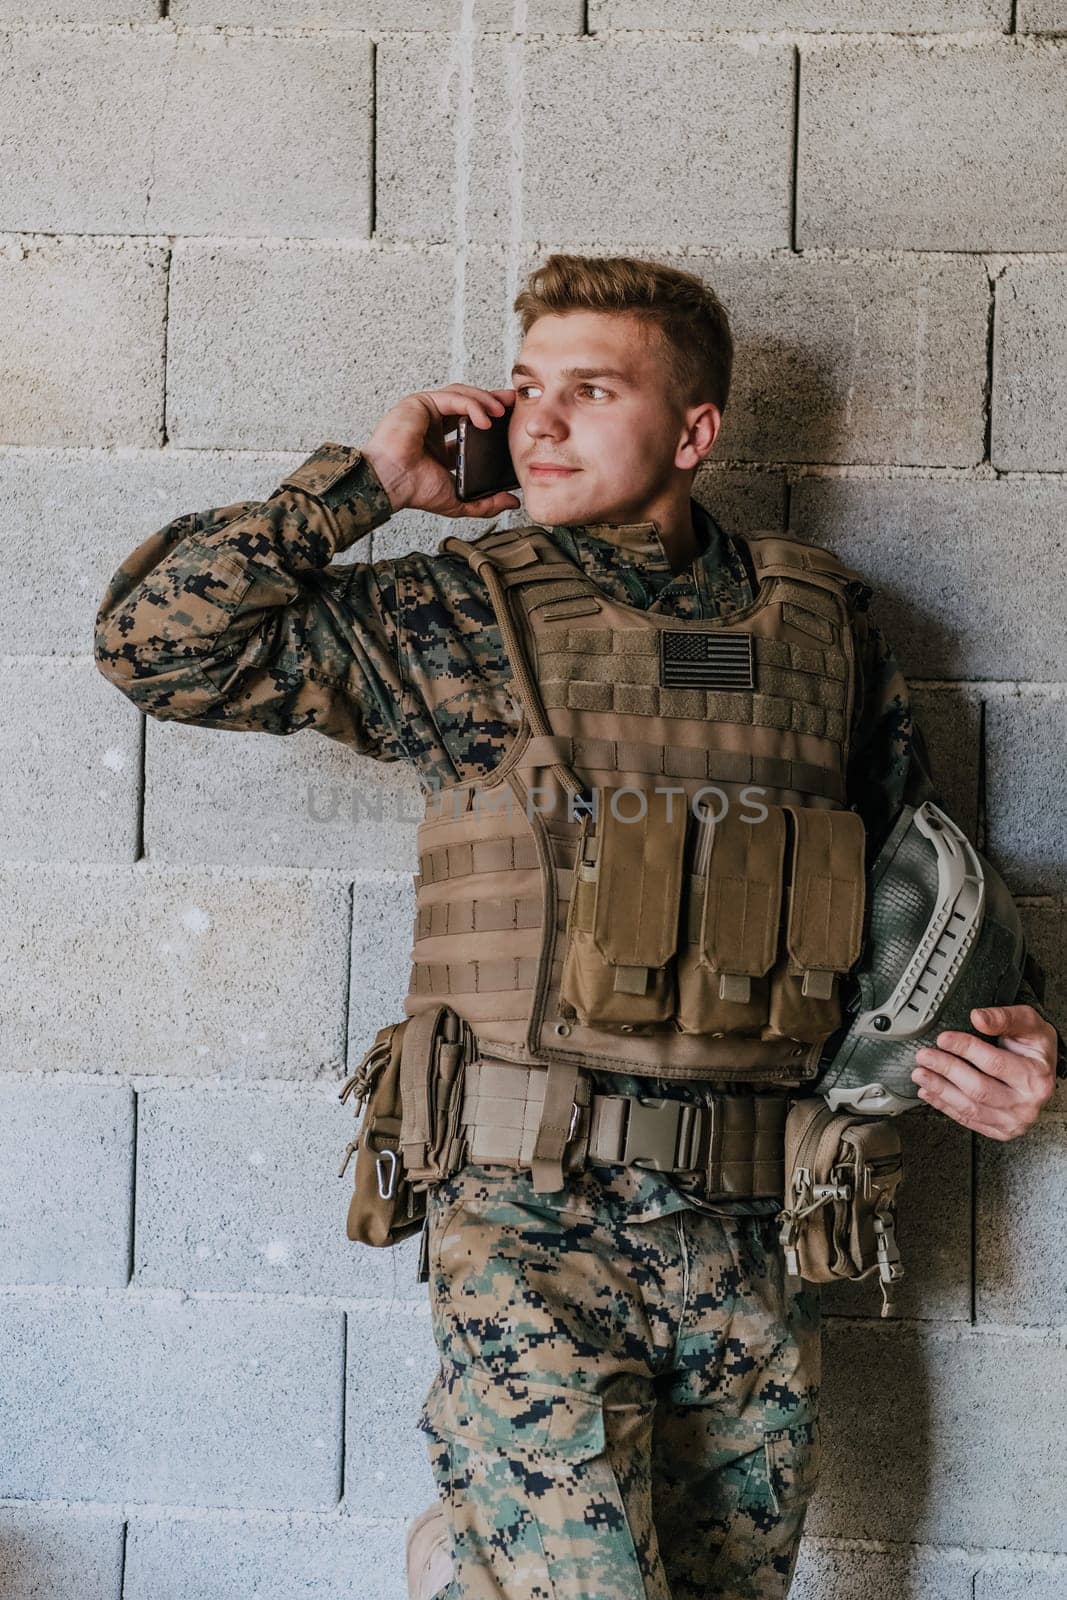 Soldier using smartphone and calling home family and frinds.